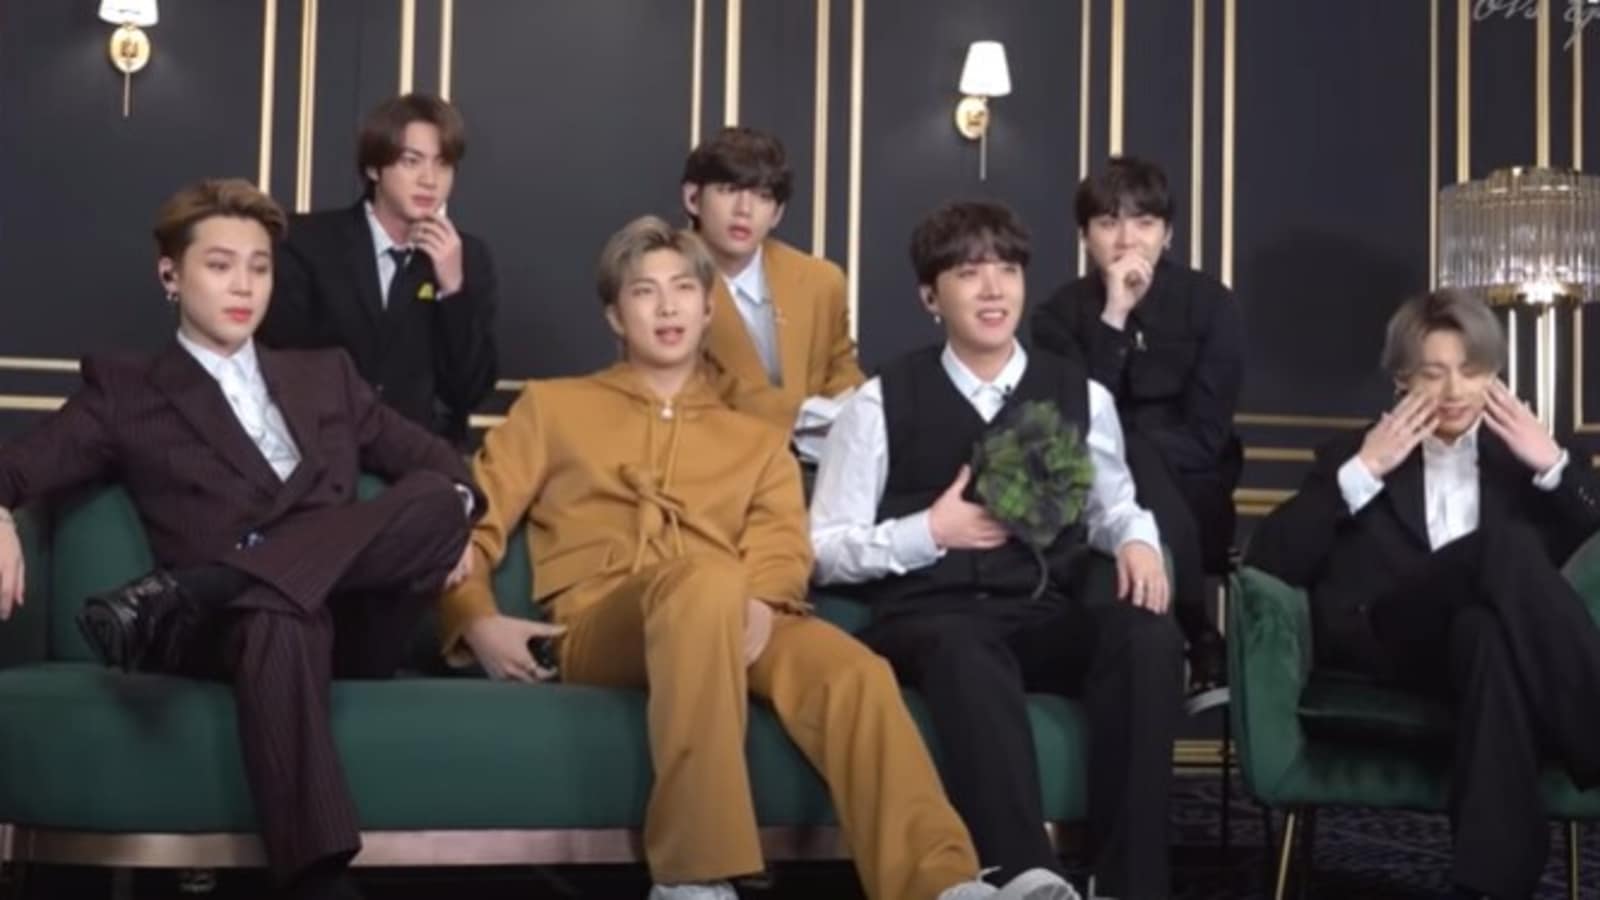 Will BTS's RM and Jungkook attend the 2023 Grammys?